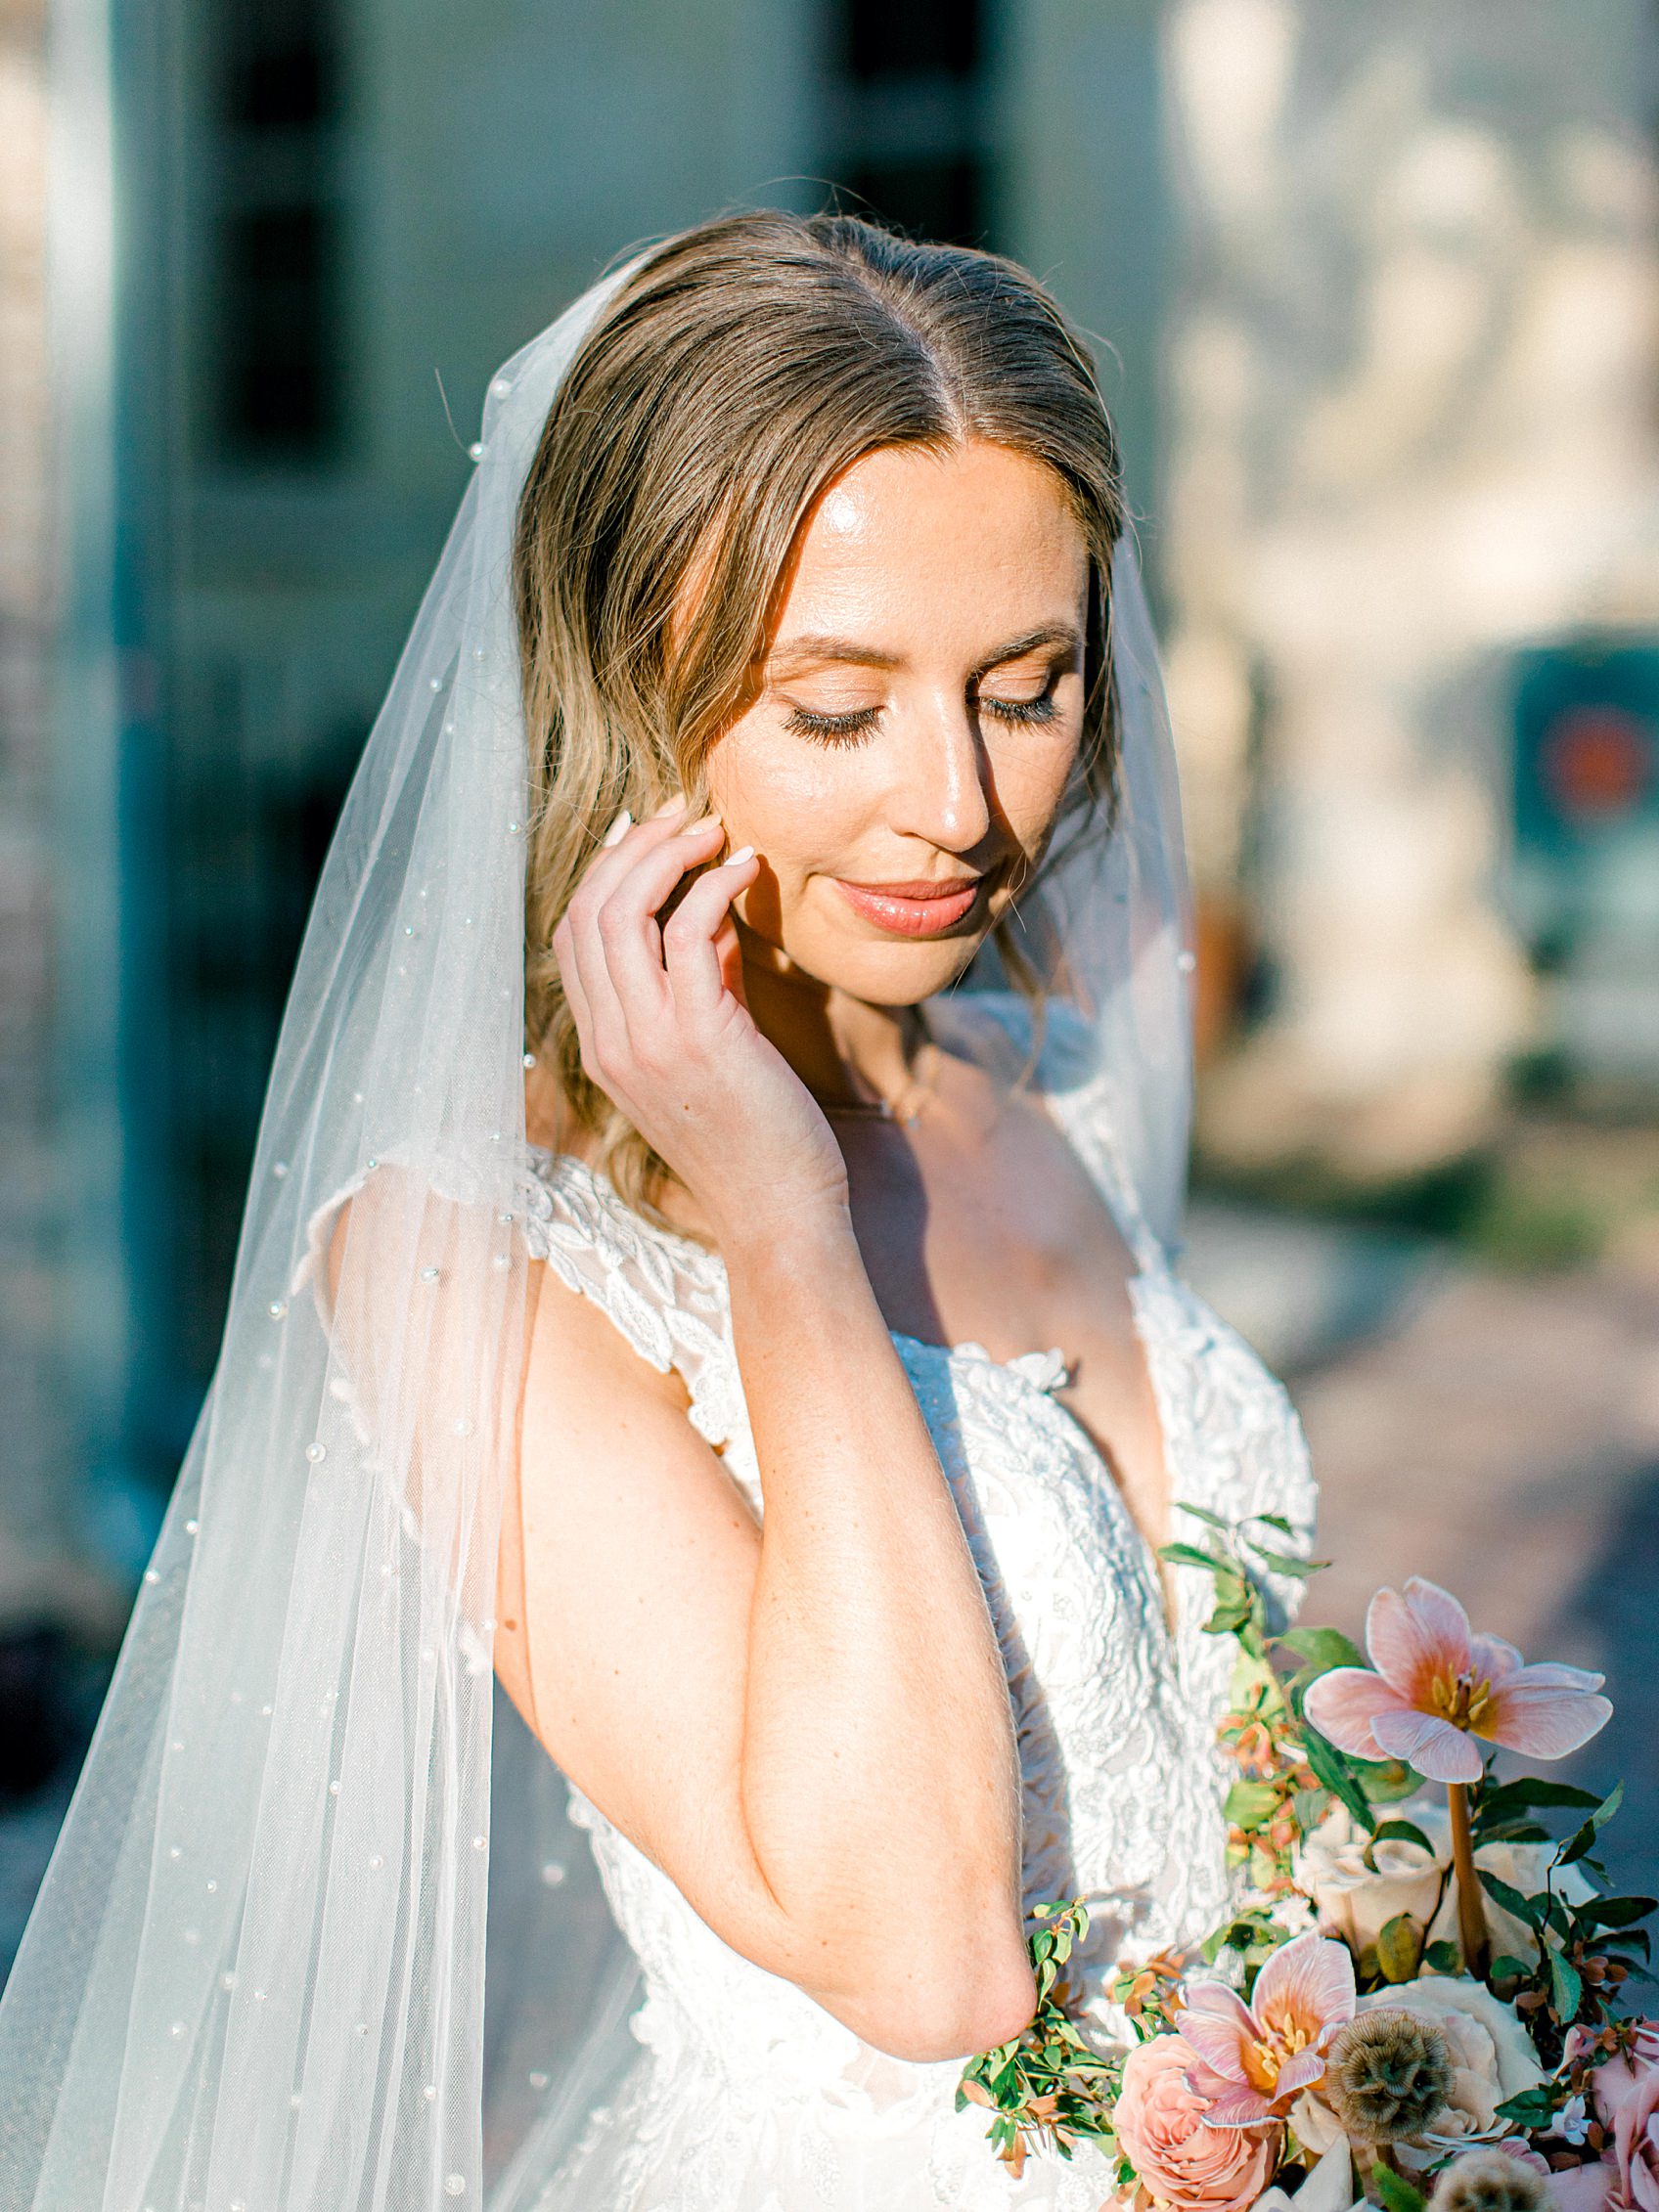 Downtown San Antonio Bridal Photography Session by Allison Jeffers Wedding Photography 0015